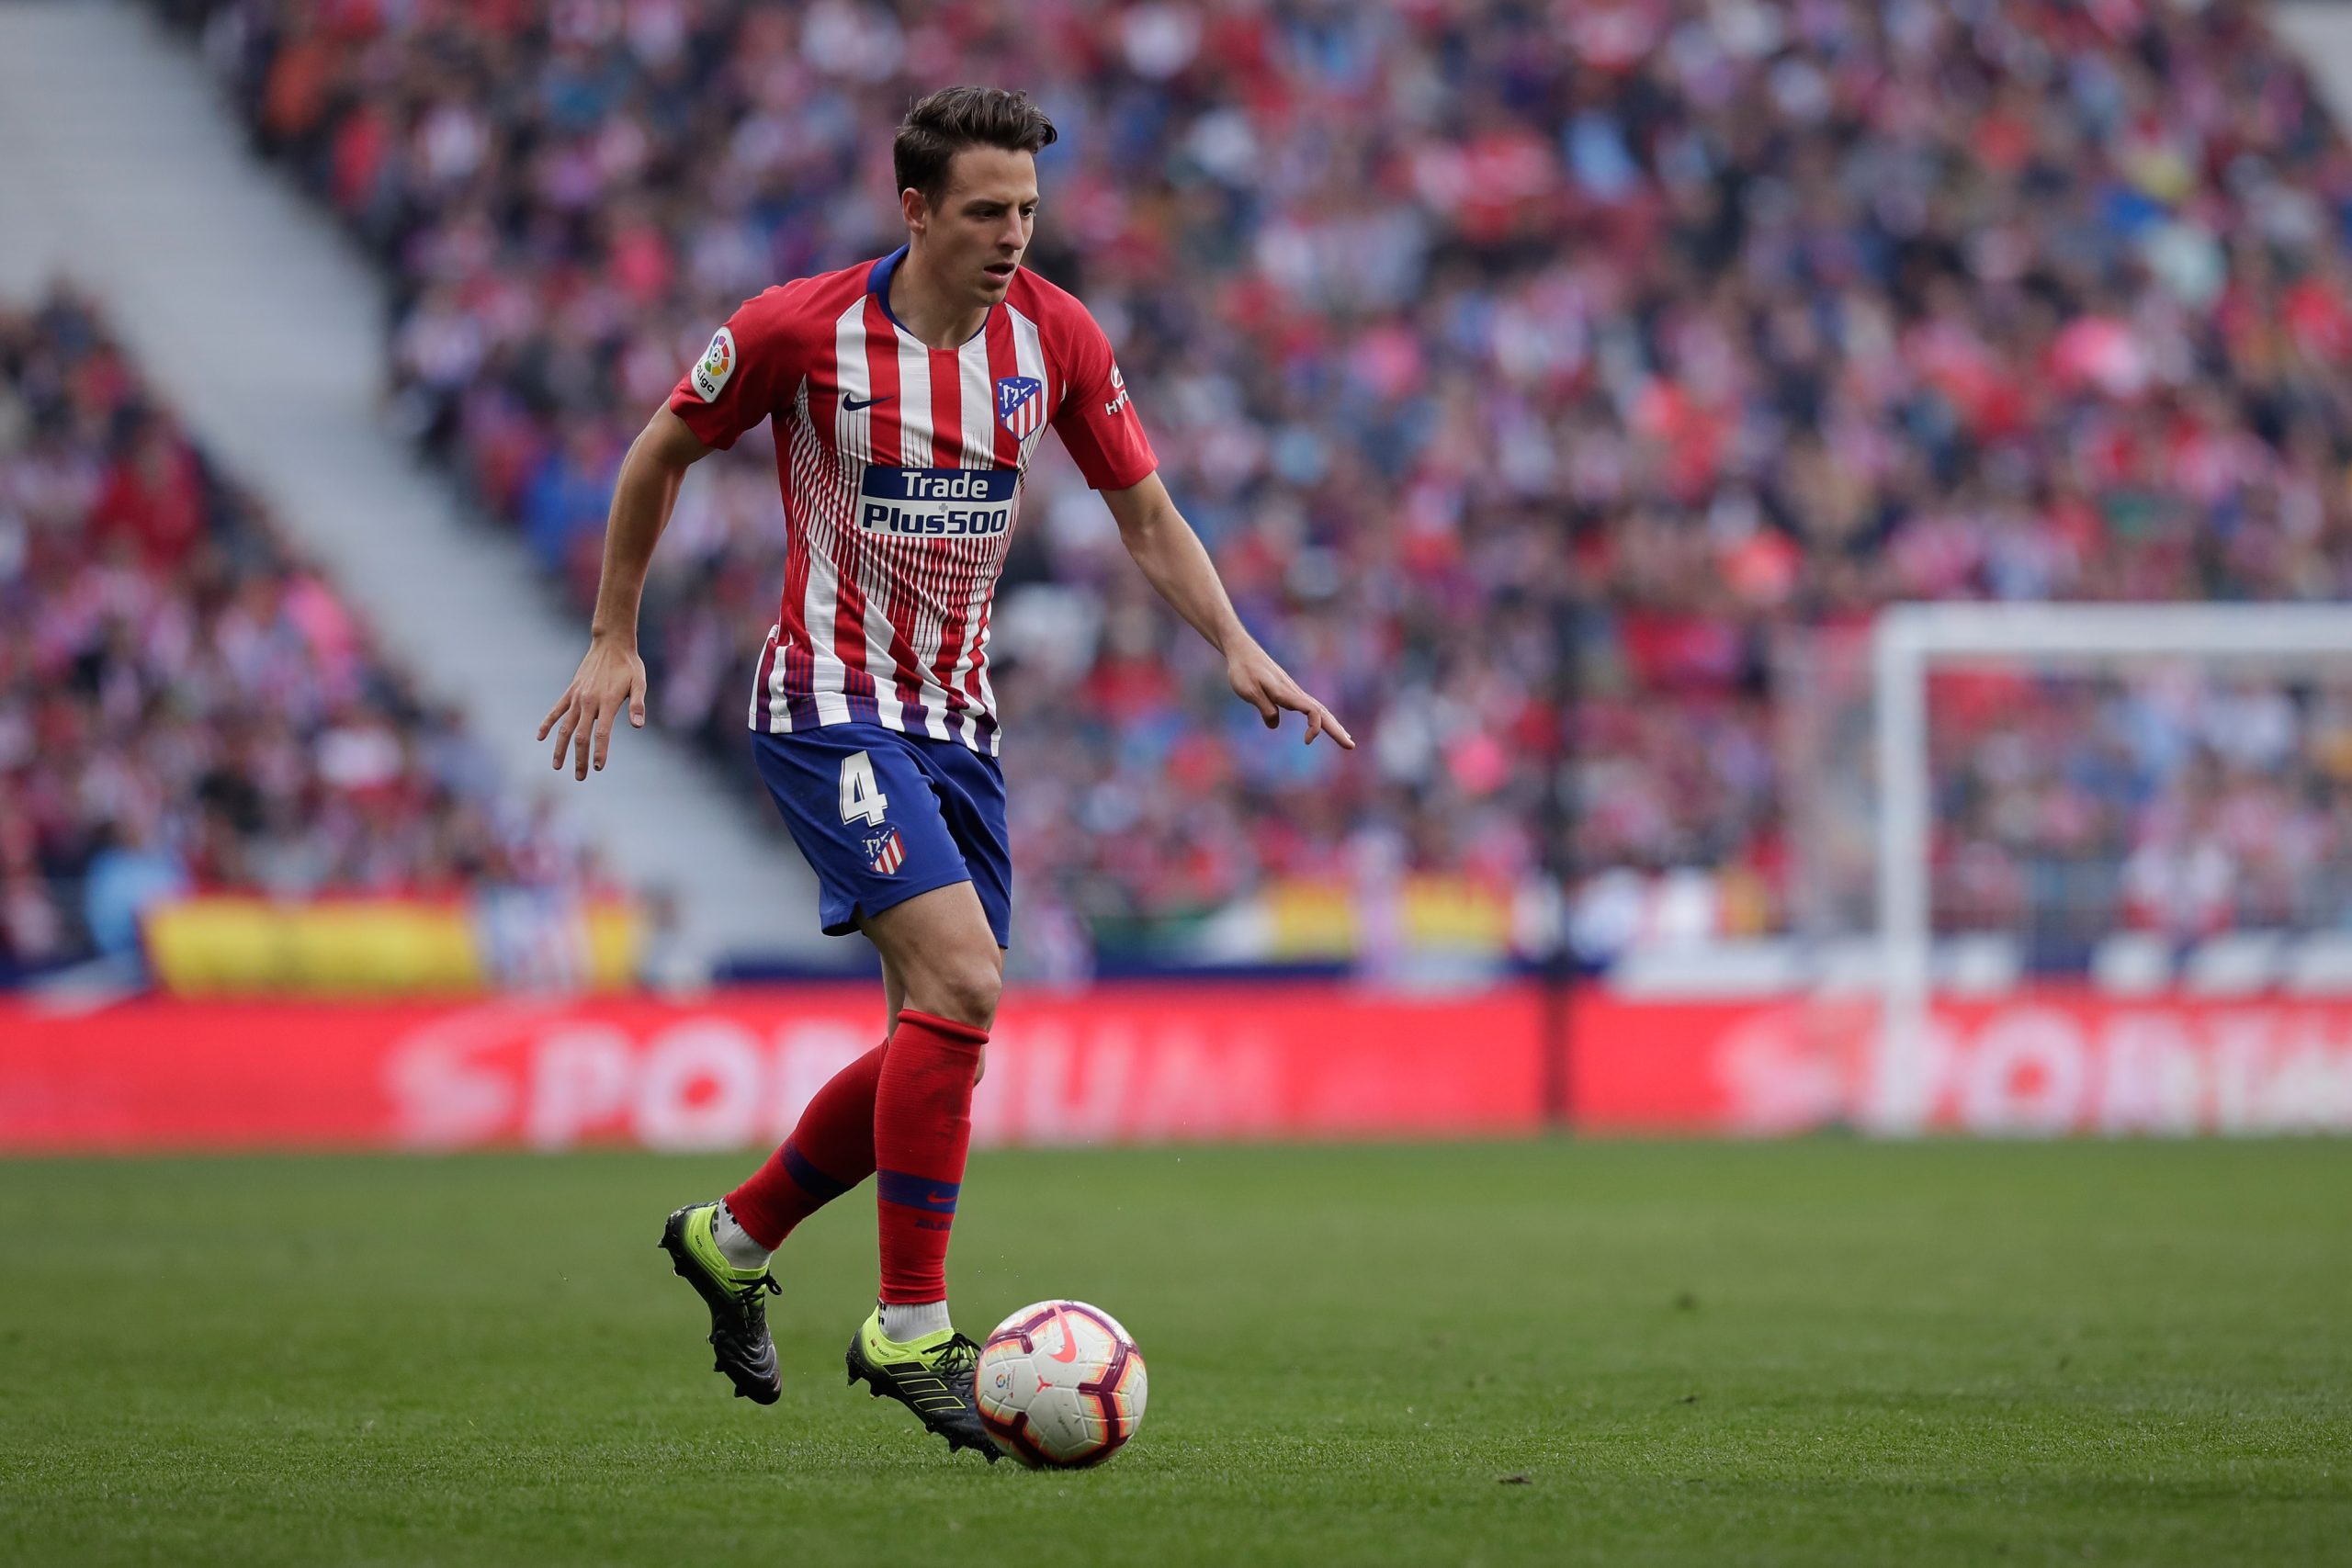 MADRID, SPAIN - FEBRUARY 24: Santiago Arias of Atletico de Madrid controls the ball during the La Liga match between  Club Atletico de Madrid and Villarreal CF at Wanda Metropolitano on February 24, 2019 in Madrid, Spain. (Photo by Gonzalo Arroyo Moreno/Getty Images)